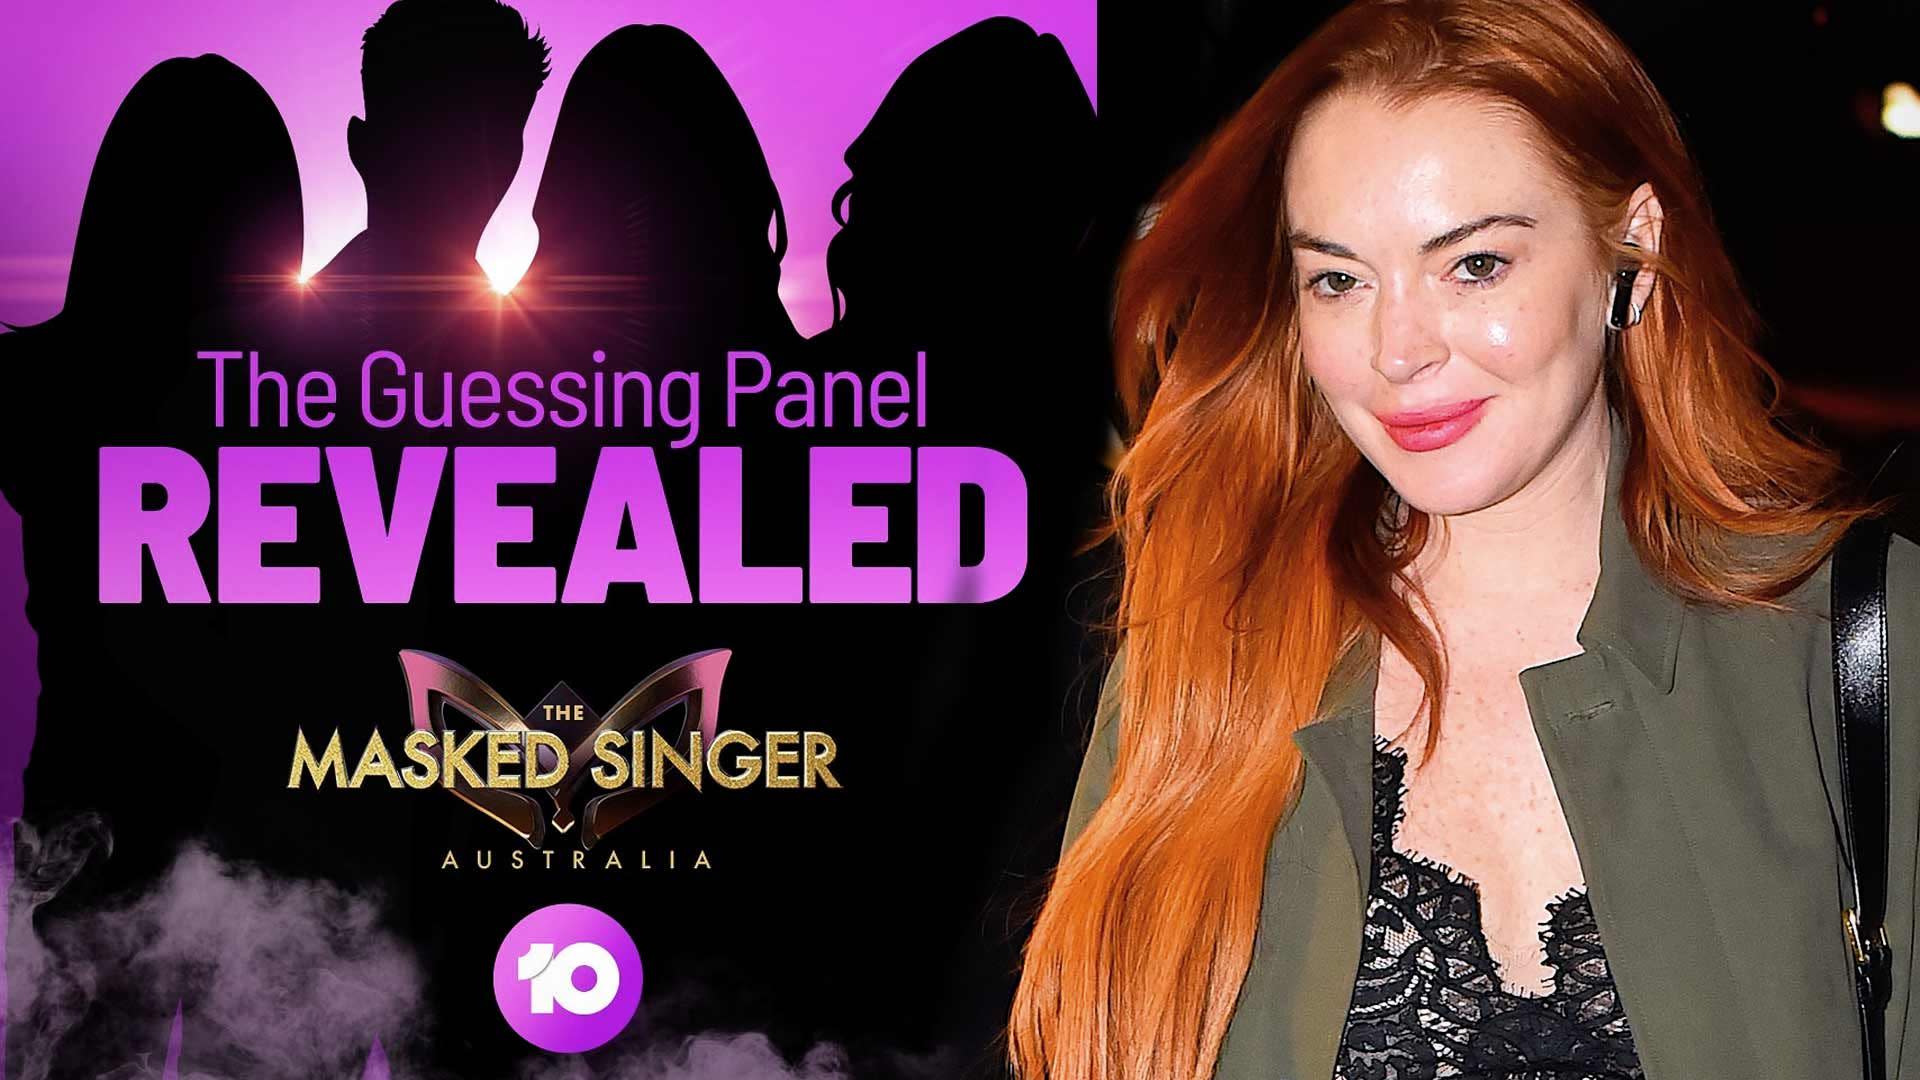 Lindsay Lohan Is Going To Be On The Masked Singer In Australia 5148